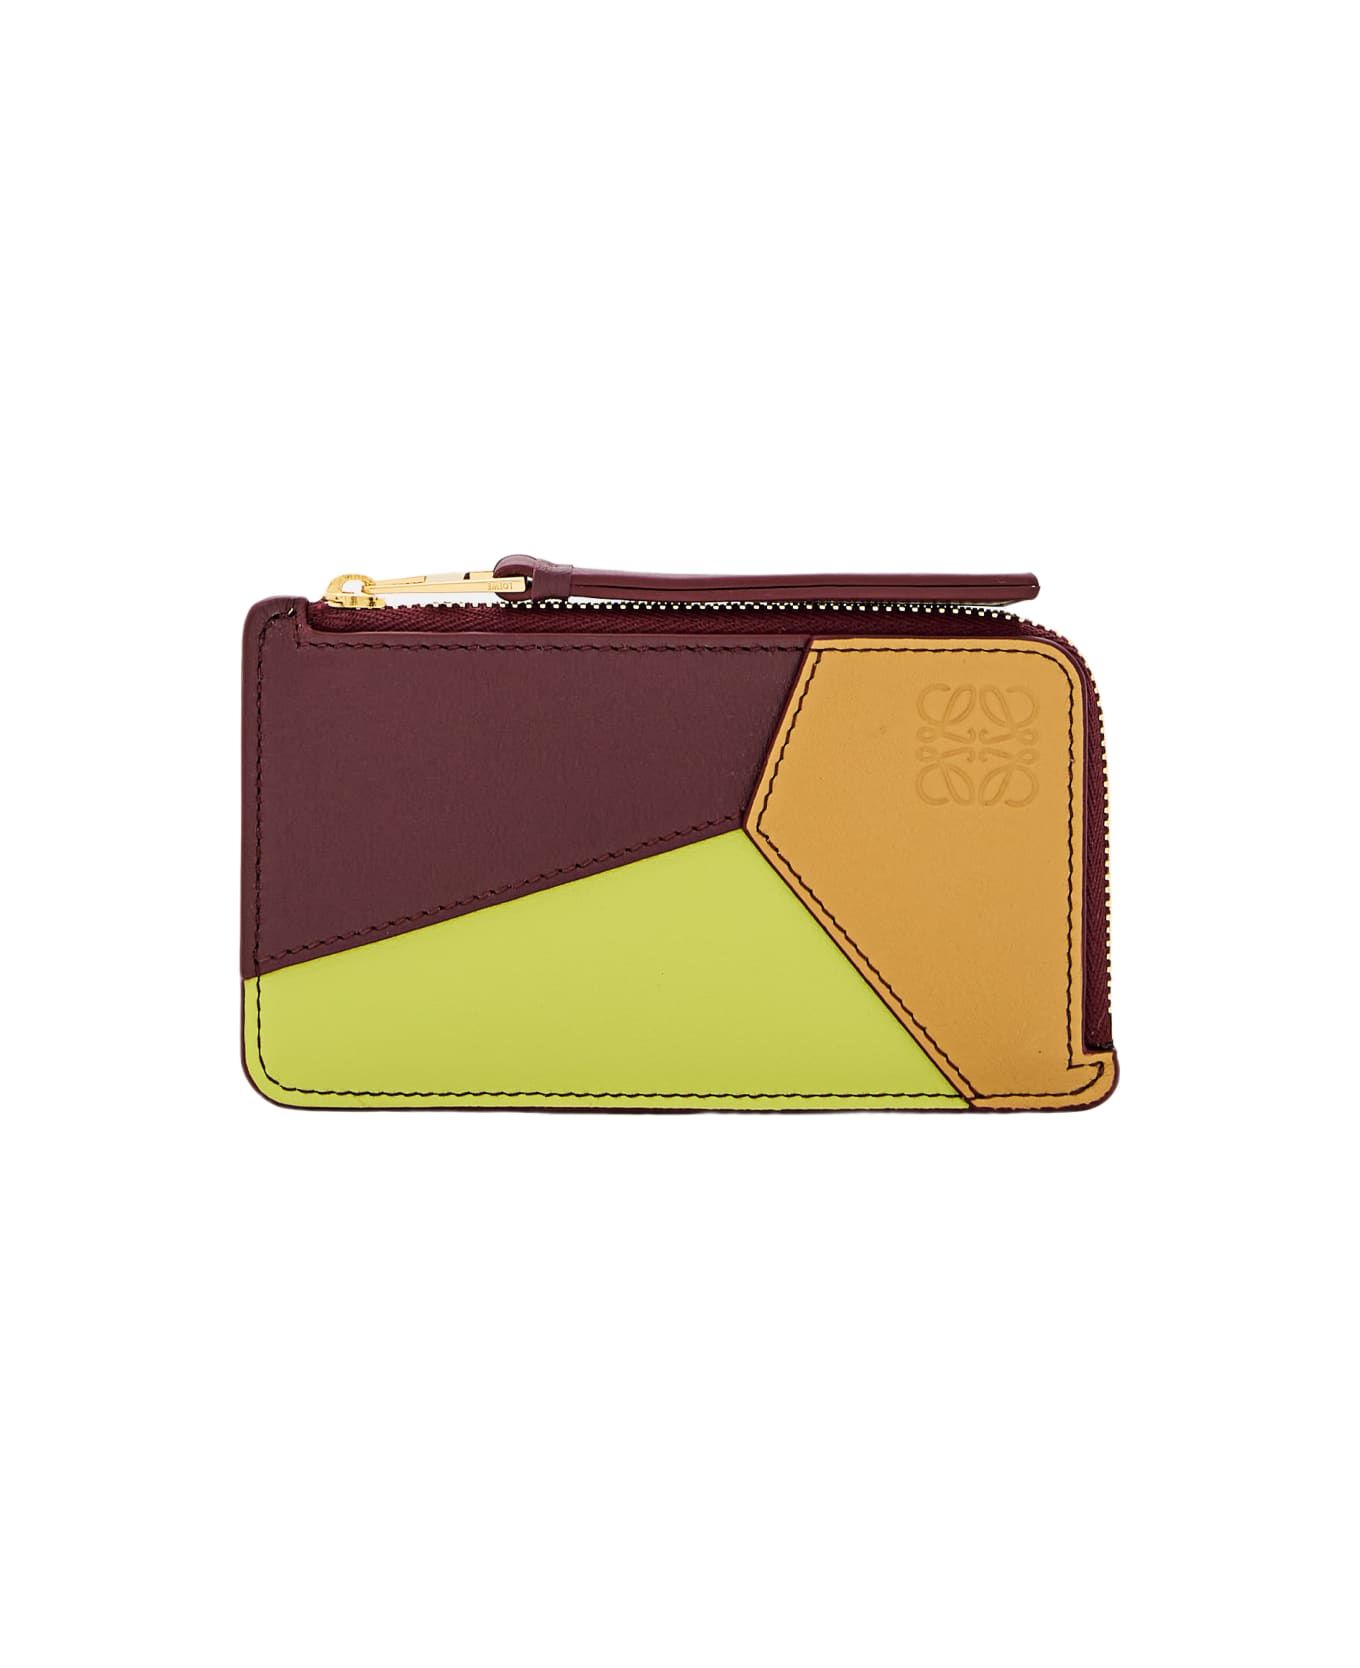 Loewe Puzzle Coin Leather Cardholder - MultiColour